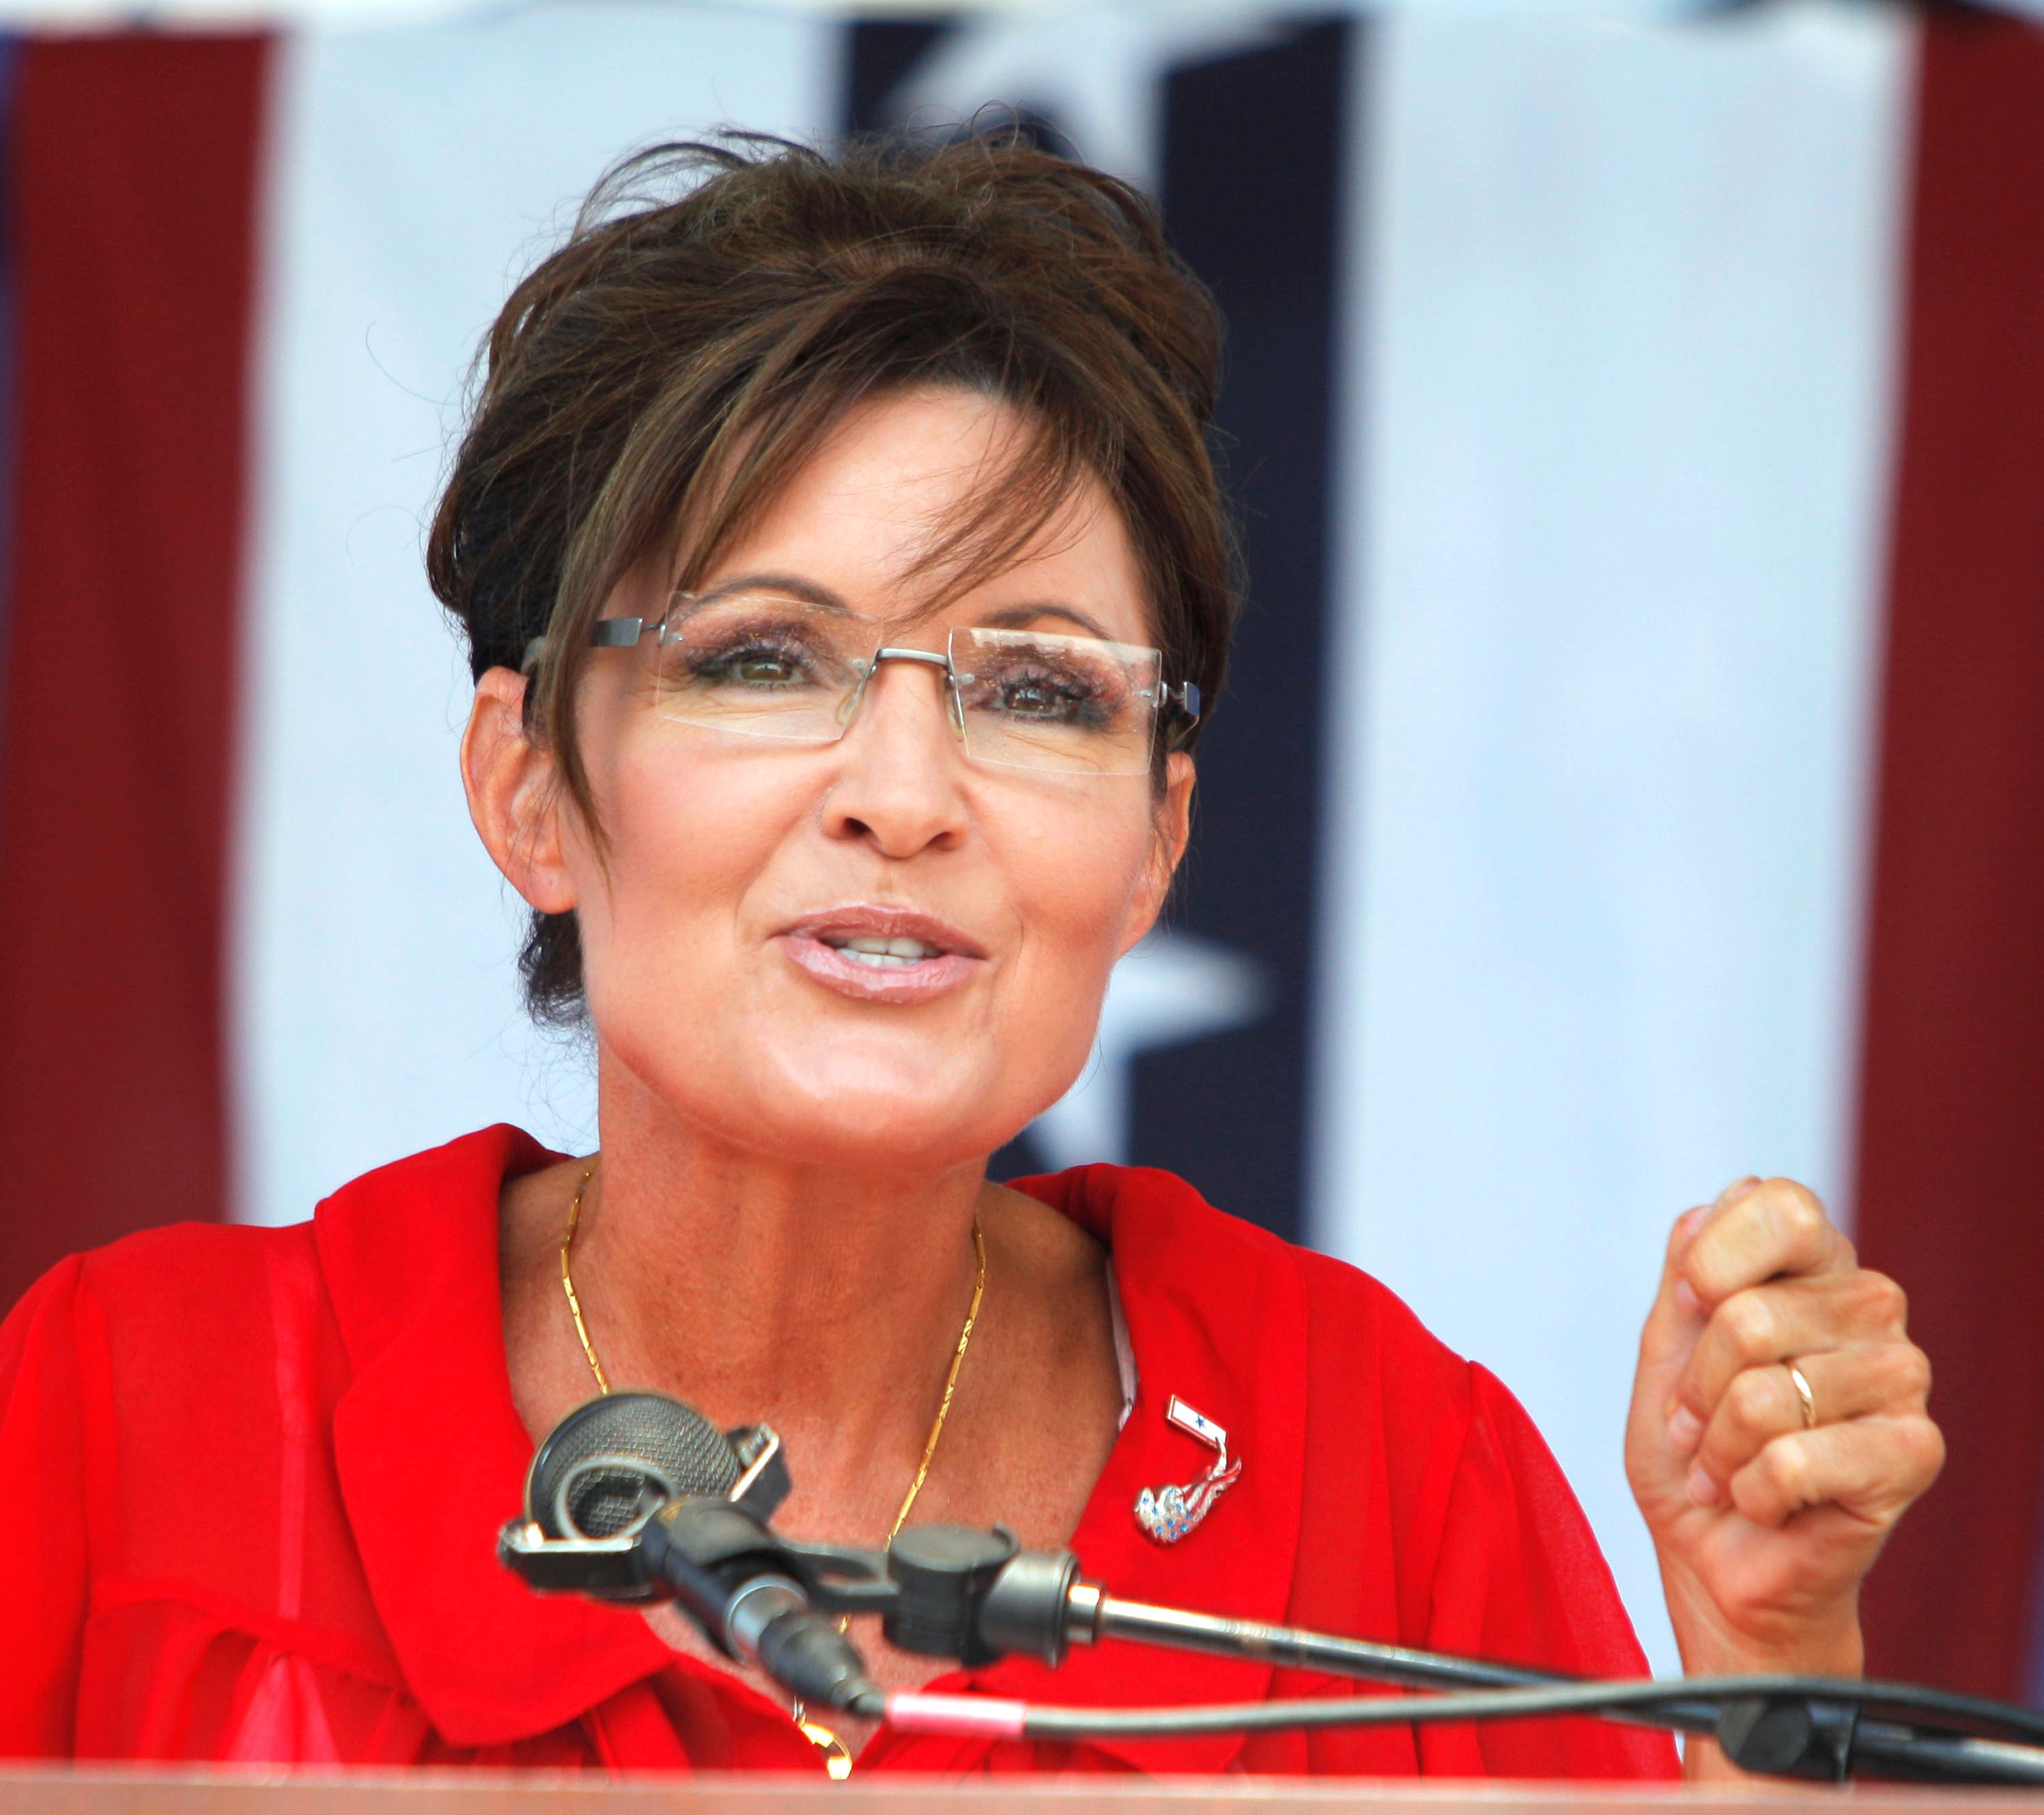 Sarah Palin Tells Vulture That Her Family Does Reality Shows to Live Life Vibrantly image picture